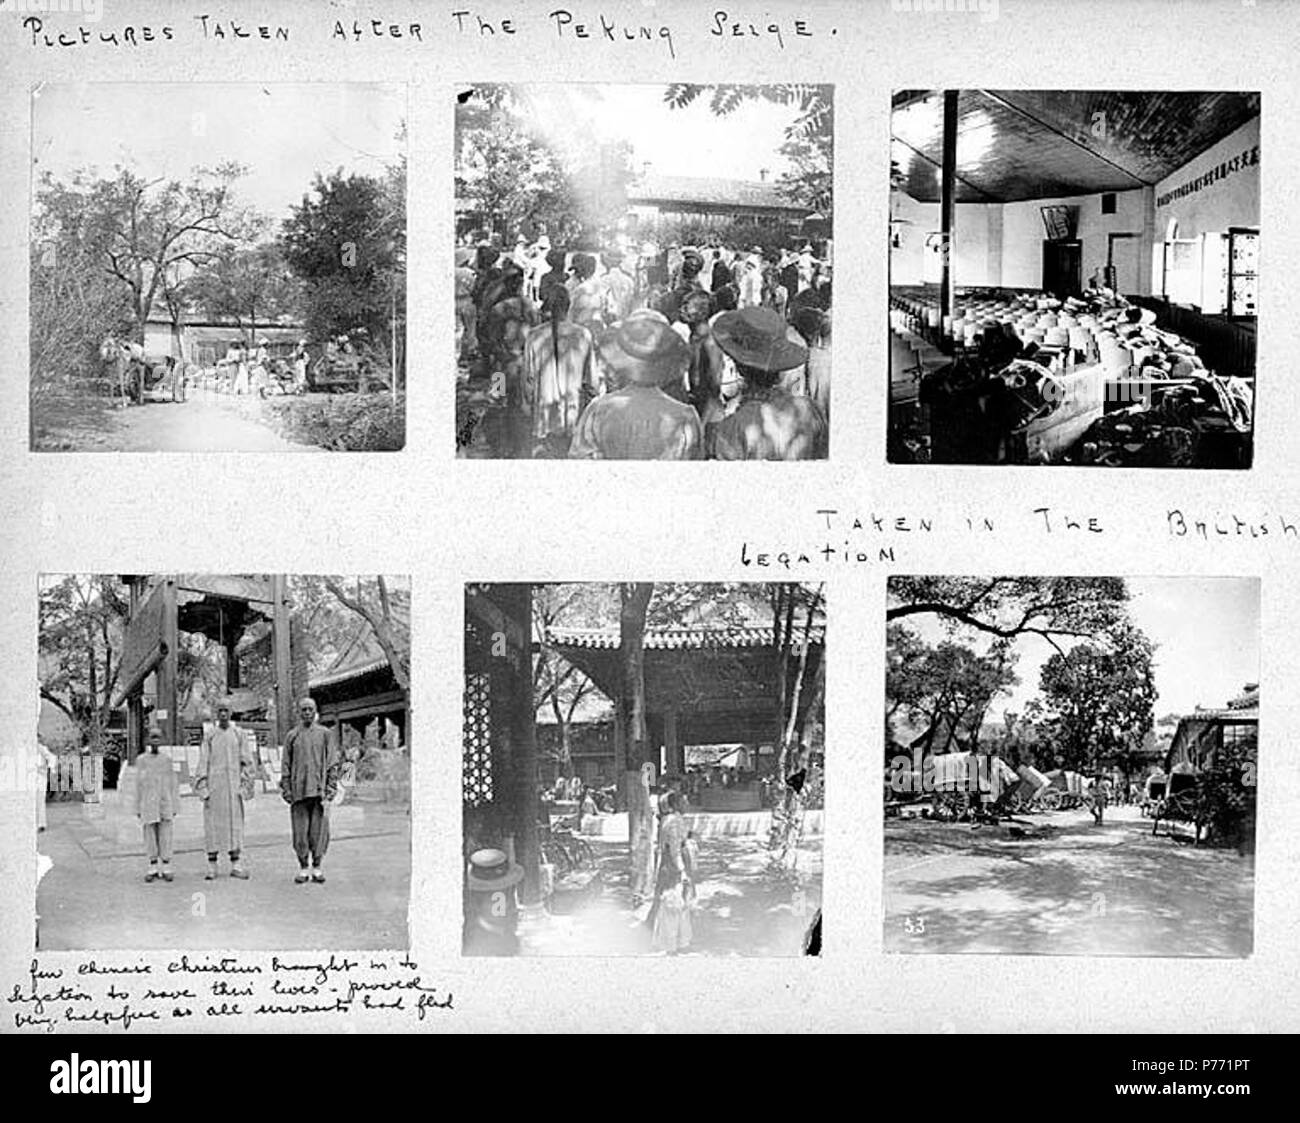 . English: 7.16 Aftermath of the Peking siege, 1900 . English: Captions on album page: Pictures taken after the Peking seige; Taken in the British legation; Few Chinese Christians brought in to legation to save their lives, proved very helpful as all servants had fled . PH Coll 241.B16a-f Subjects (LCTGM): War damage--China--Beijing; Embassies--British--China--Beijing; Chinese--Clothing & dress Subjects (LCSH): Beijing (China)--History--Siege, 1900--Destruction and pillage; China--History--Boxer Rebellion, 1899-1901--Destruction and pillage; Great Britain. Legation (China)--Siege, 1900; Buildi Stock Photo